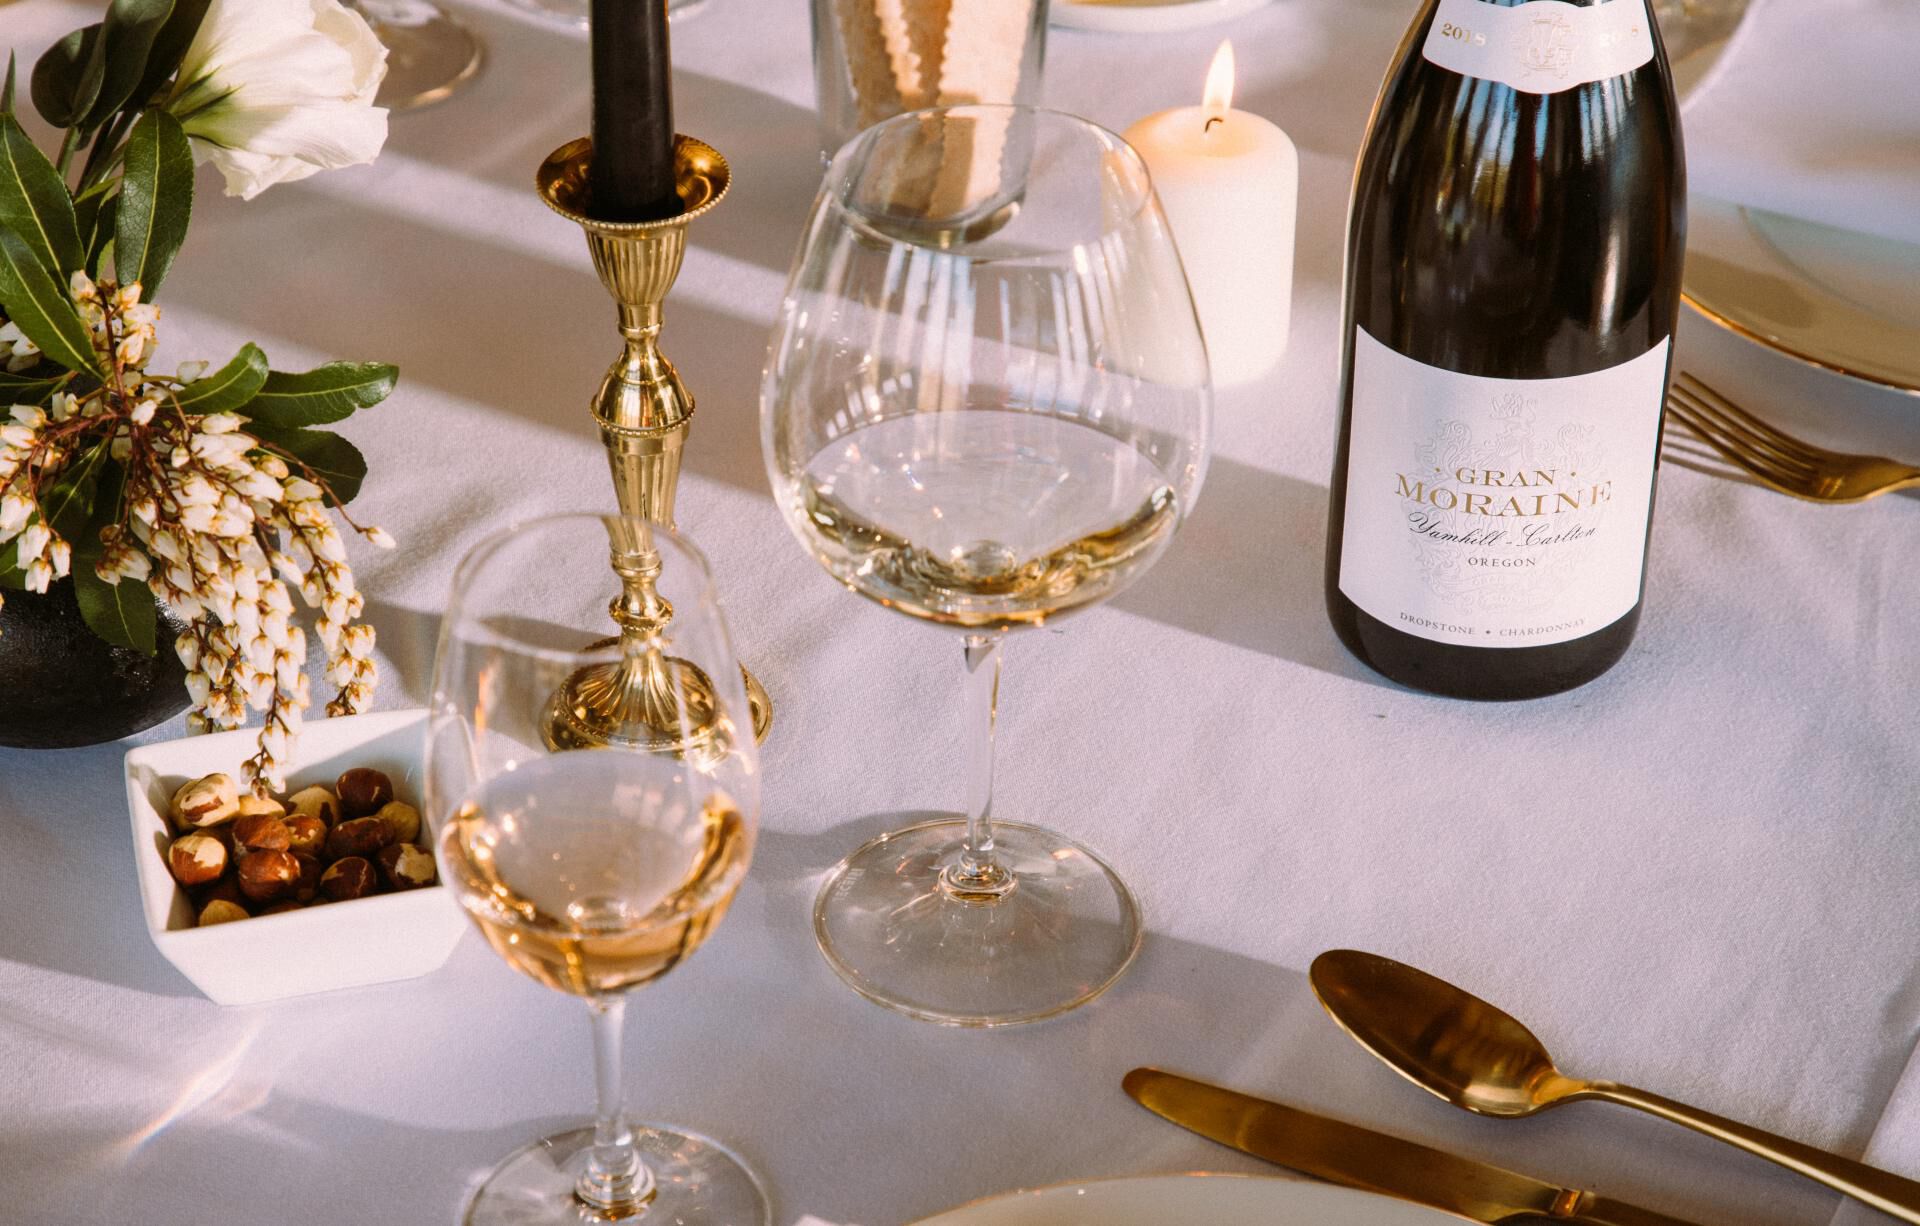 Glasses of white wine on an elegently set table